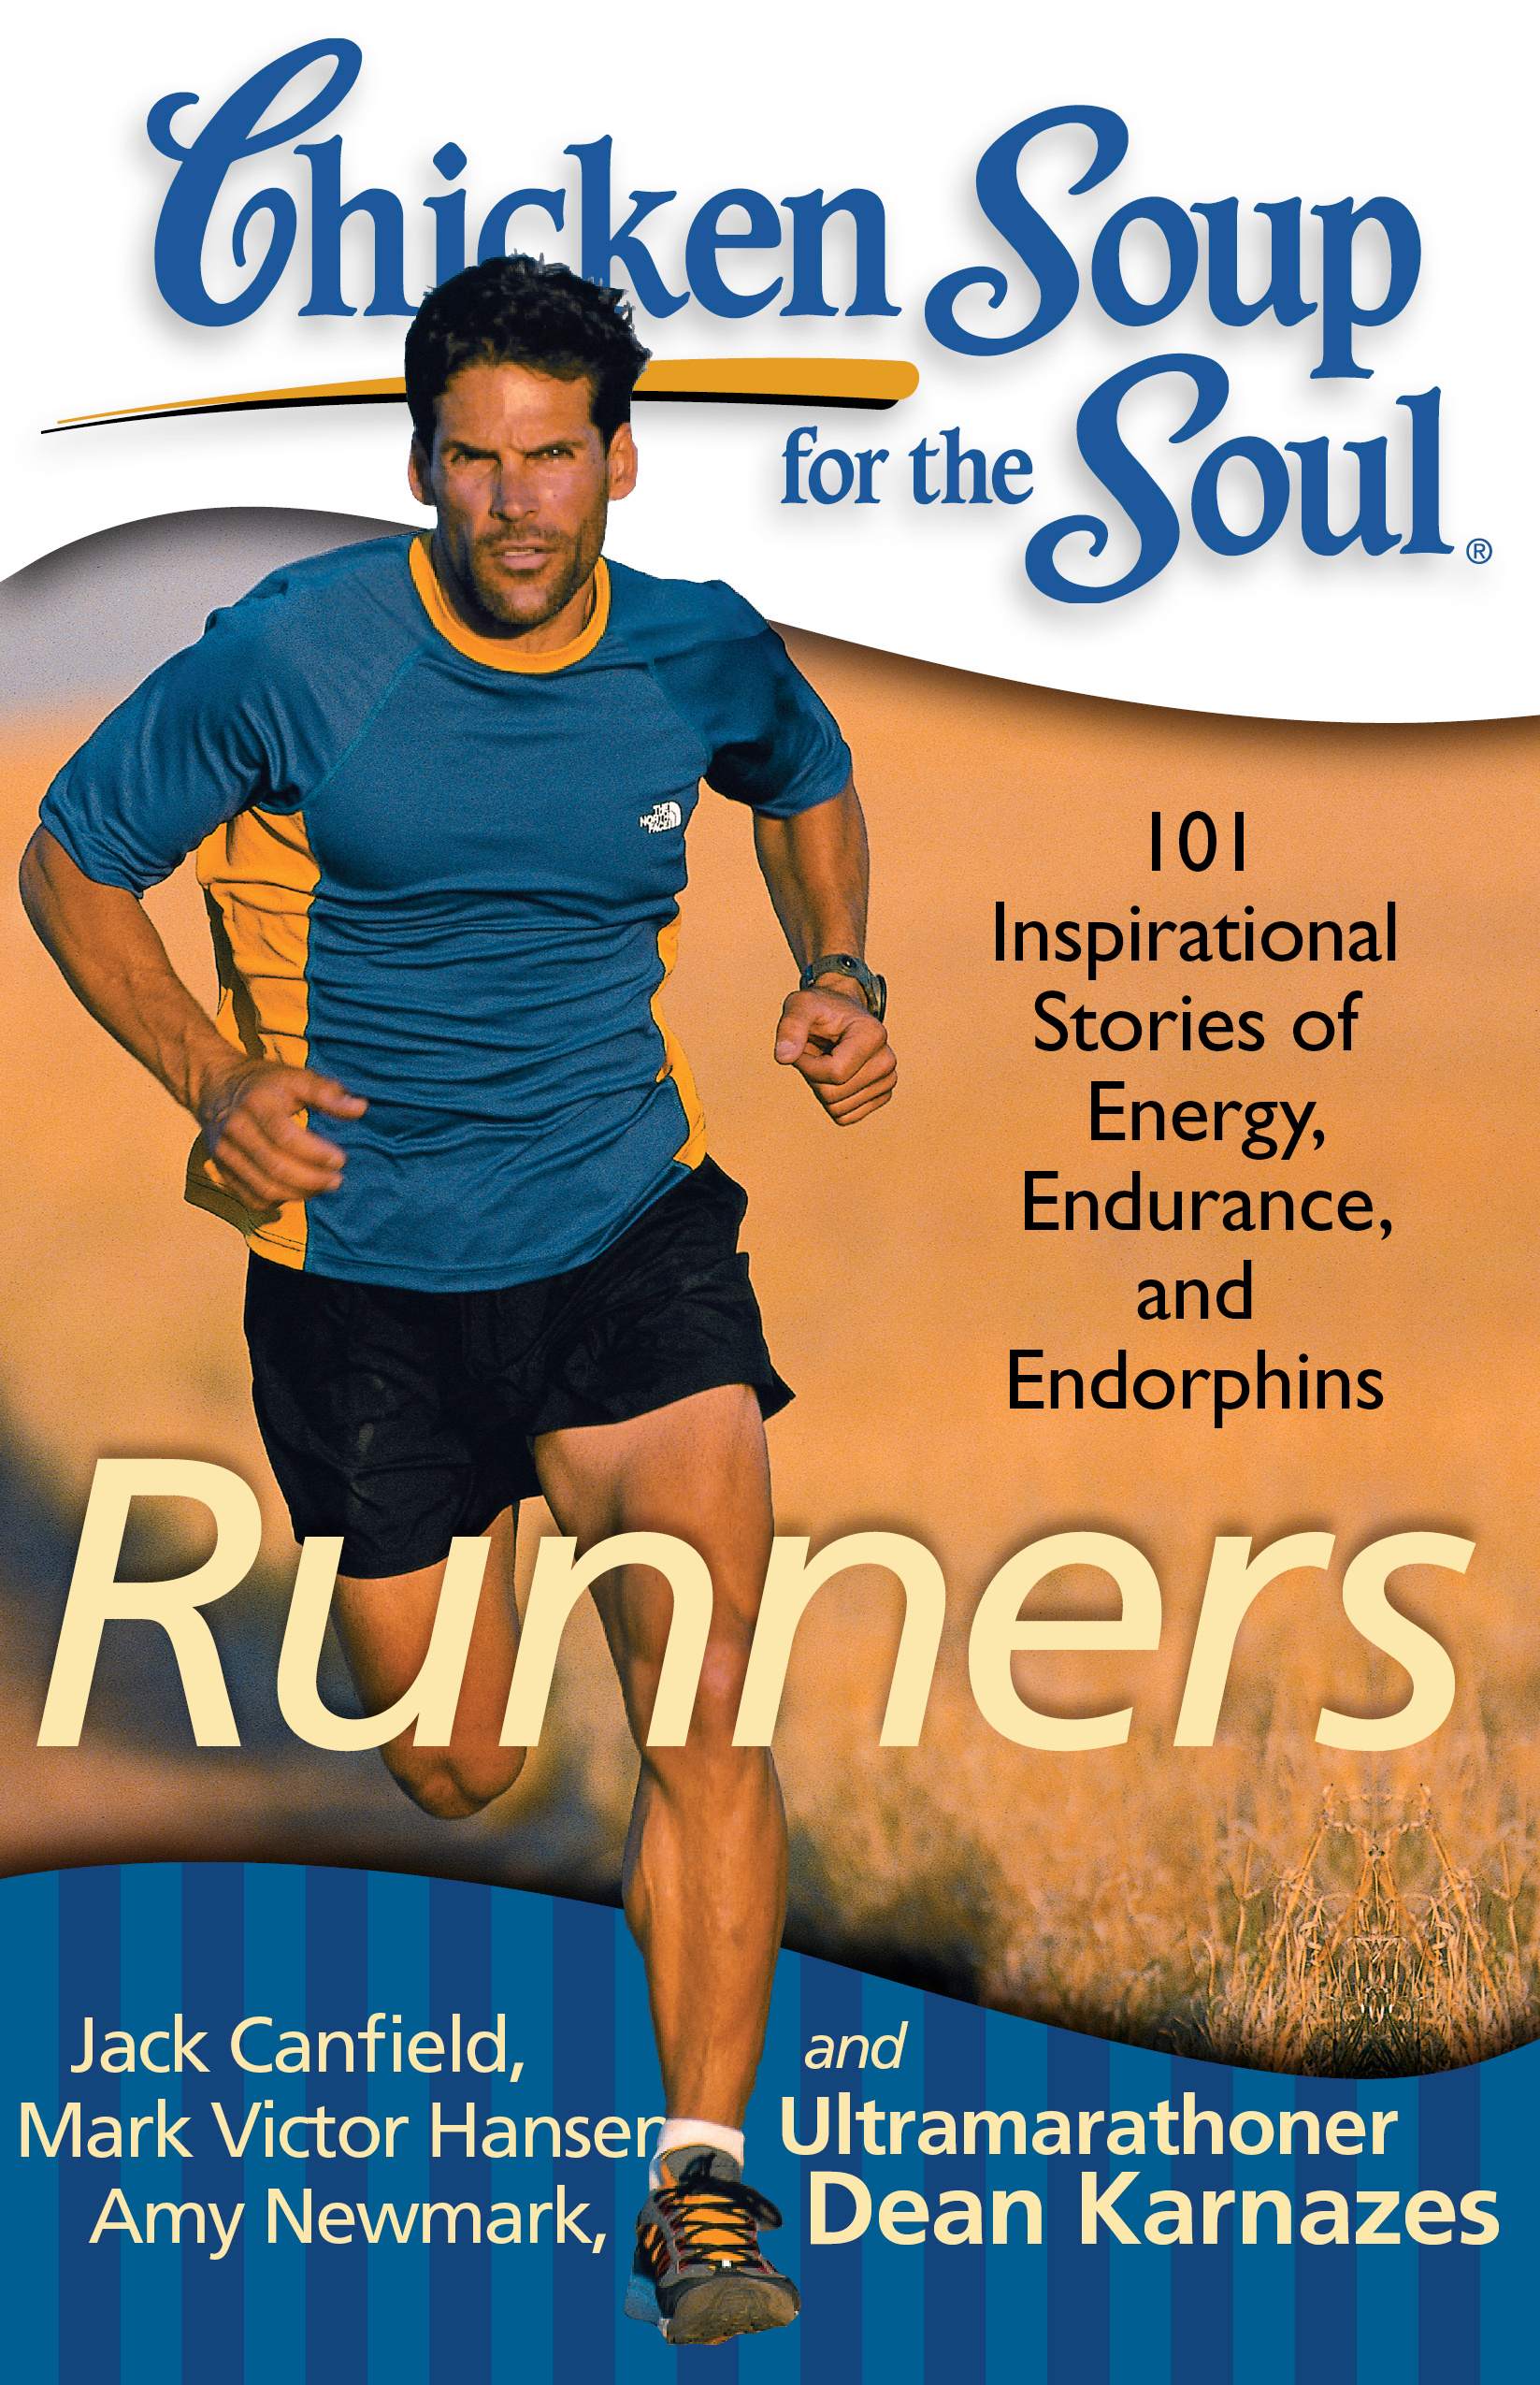 Chicken Soup for the Soul Runners Book Cover